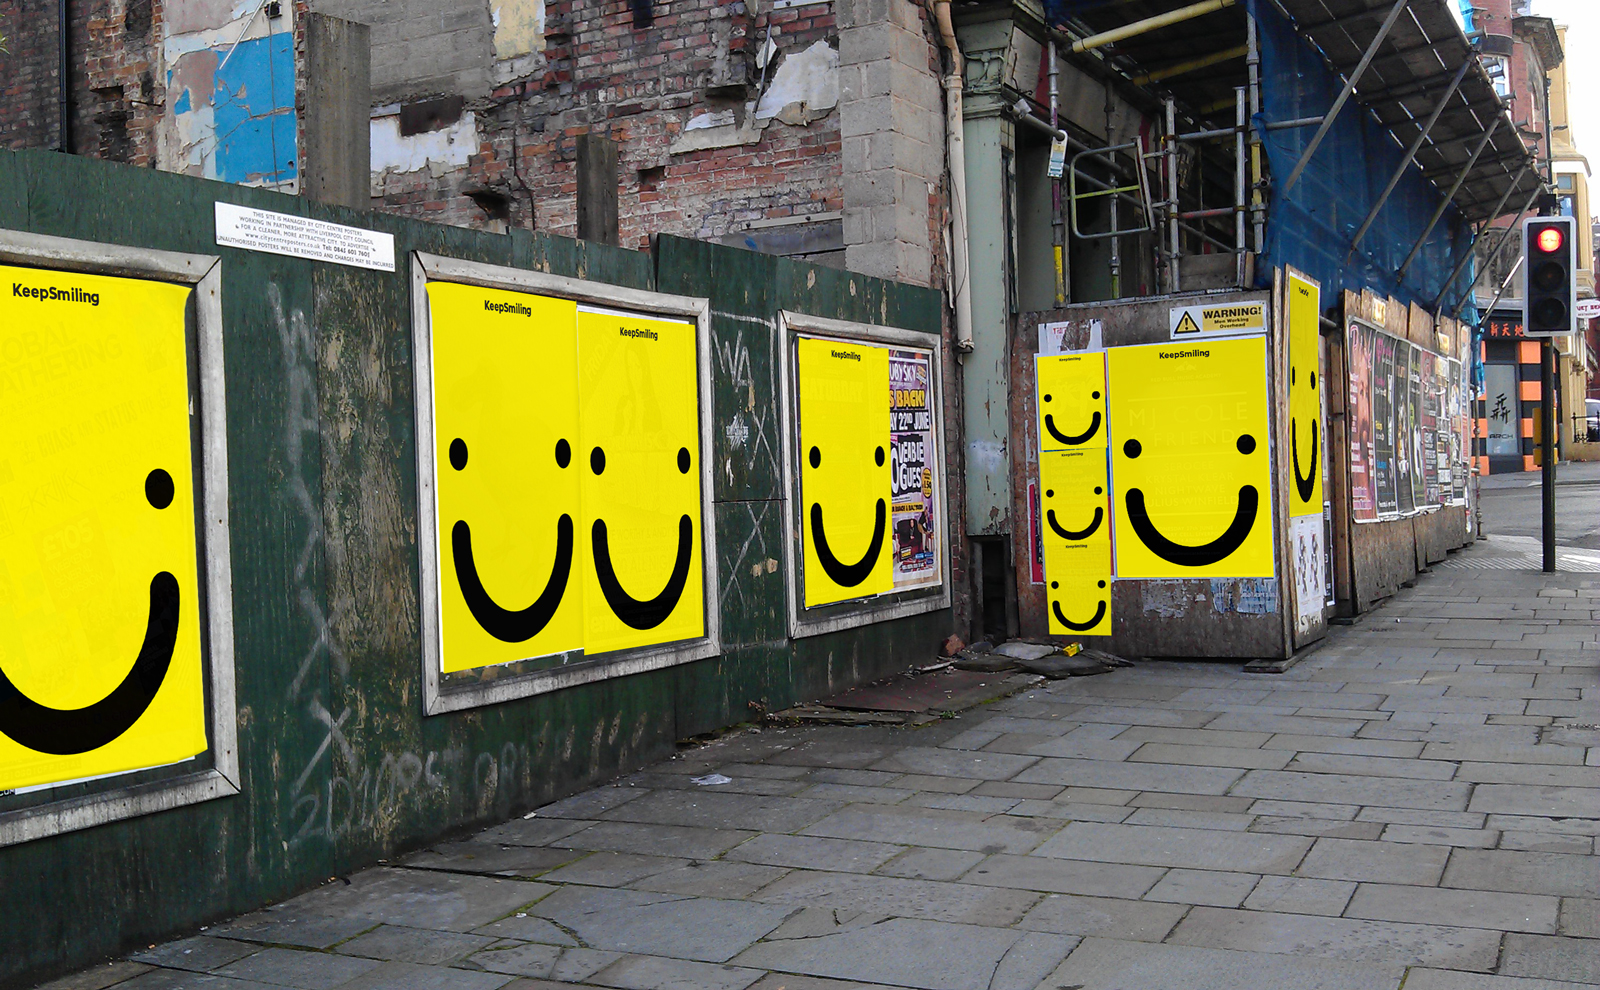 Street with Keep Smiling posters